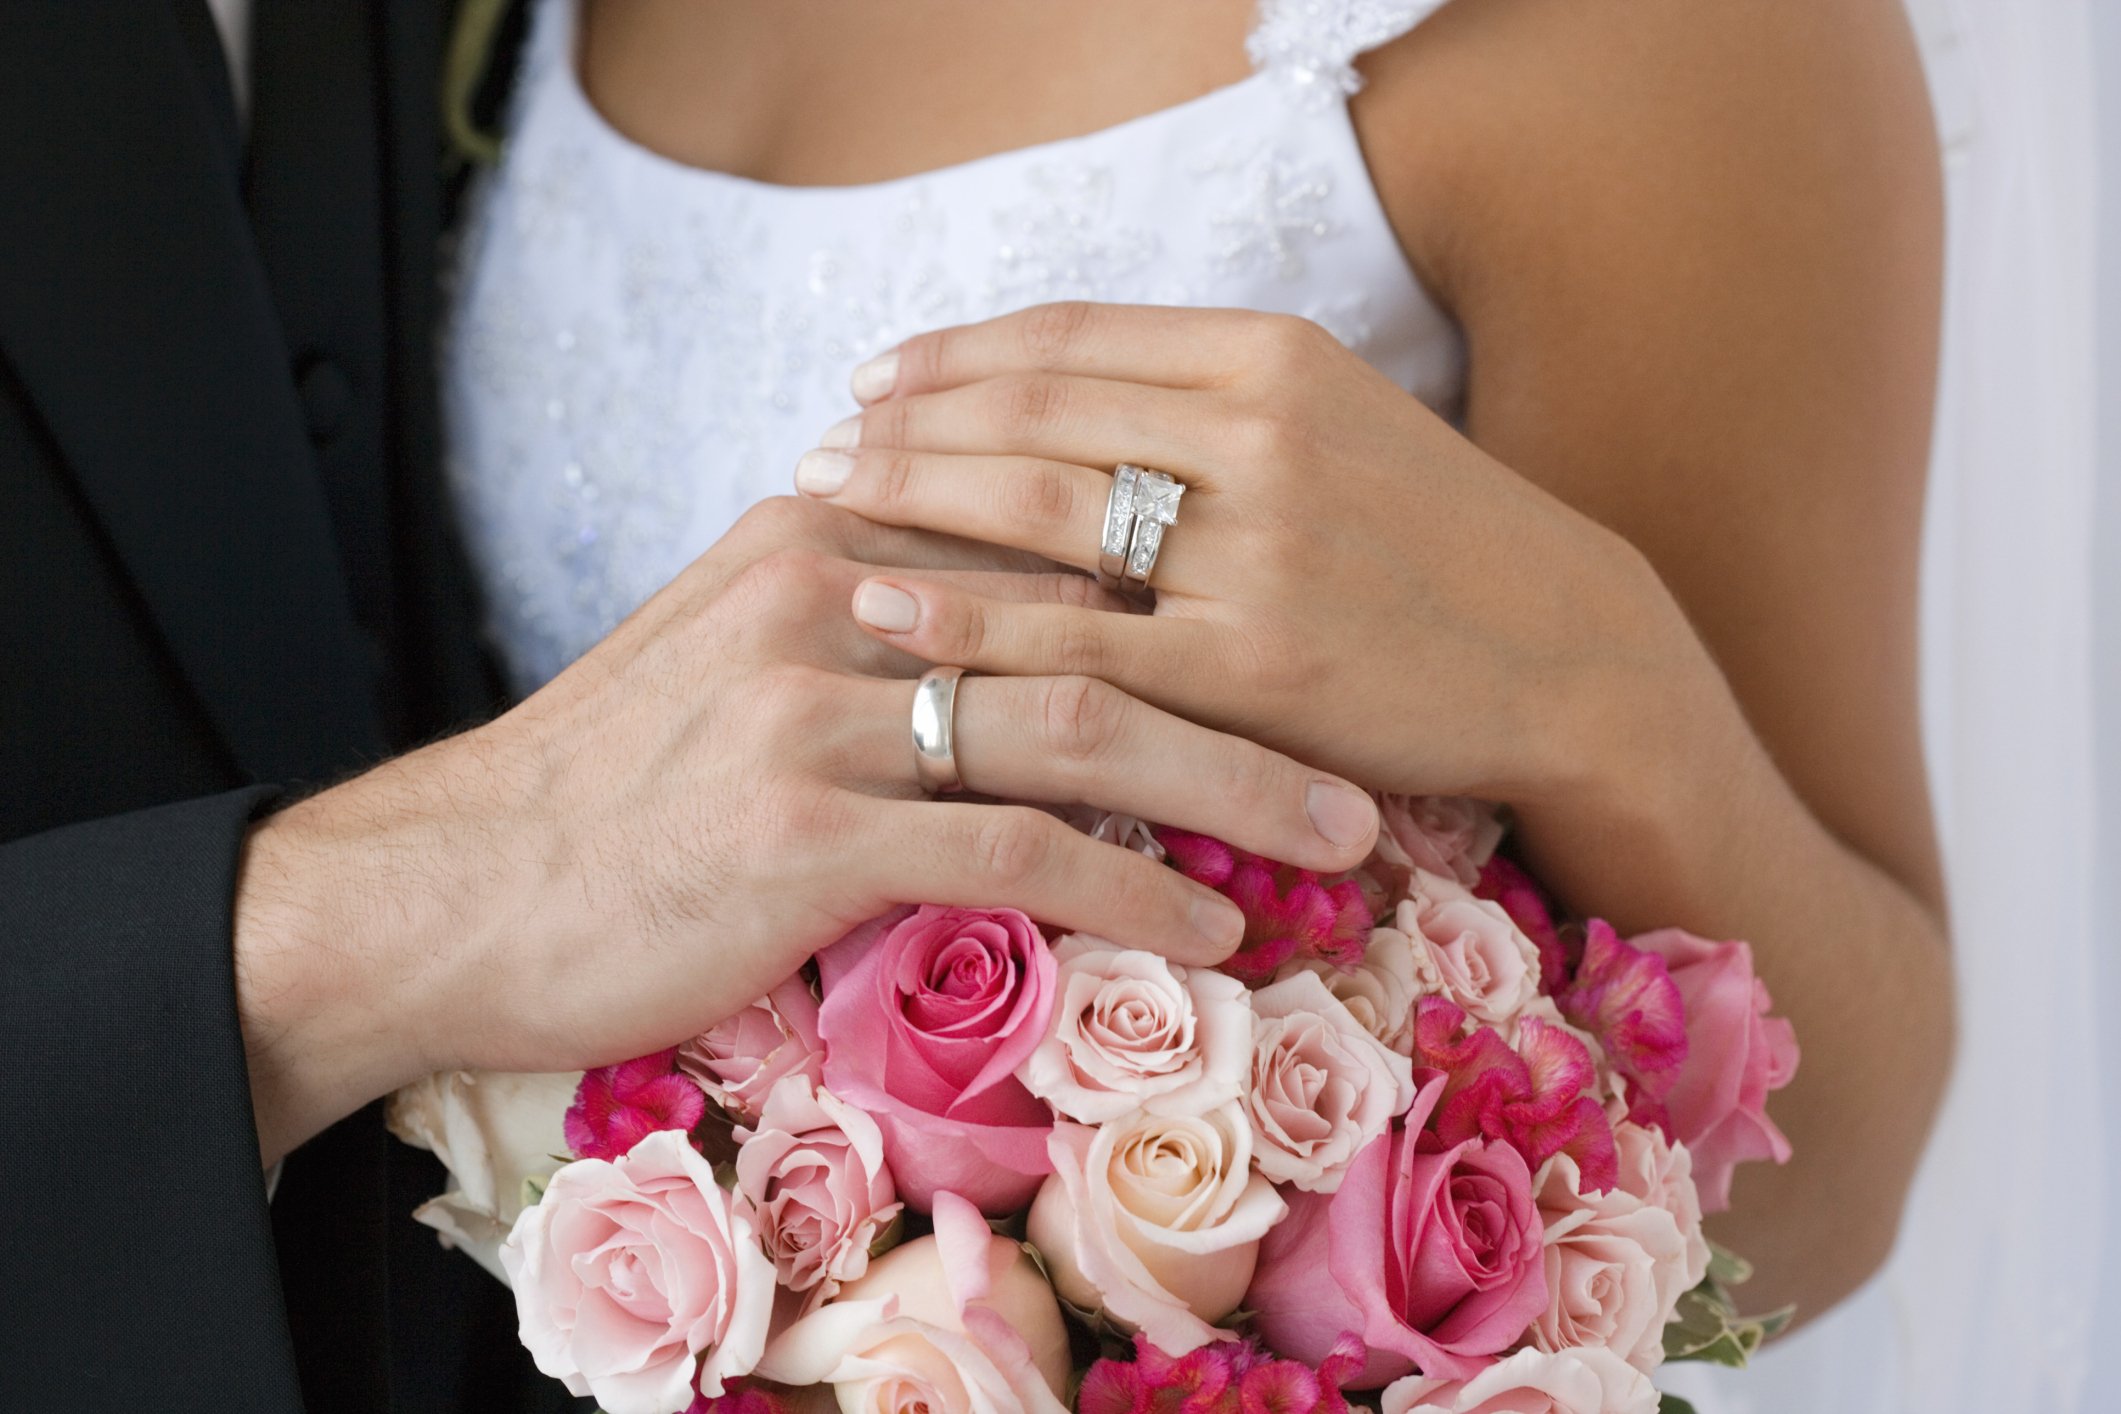 Does the Wedding or Engagement Ring go on first?